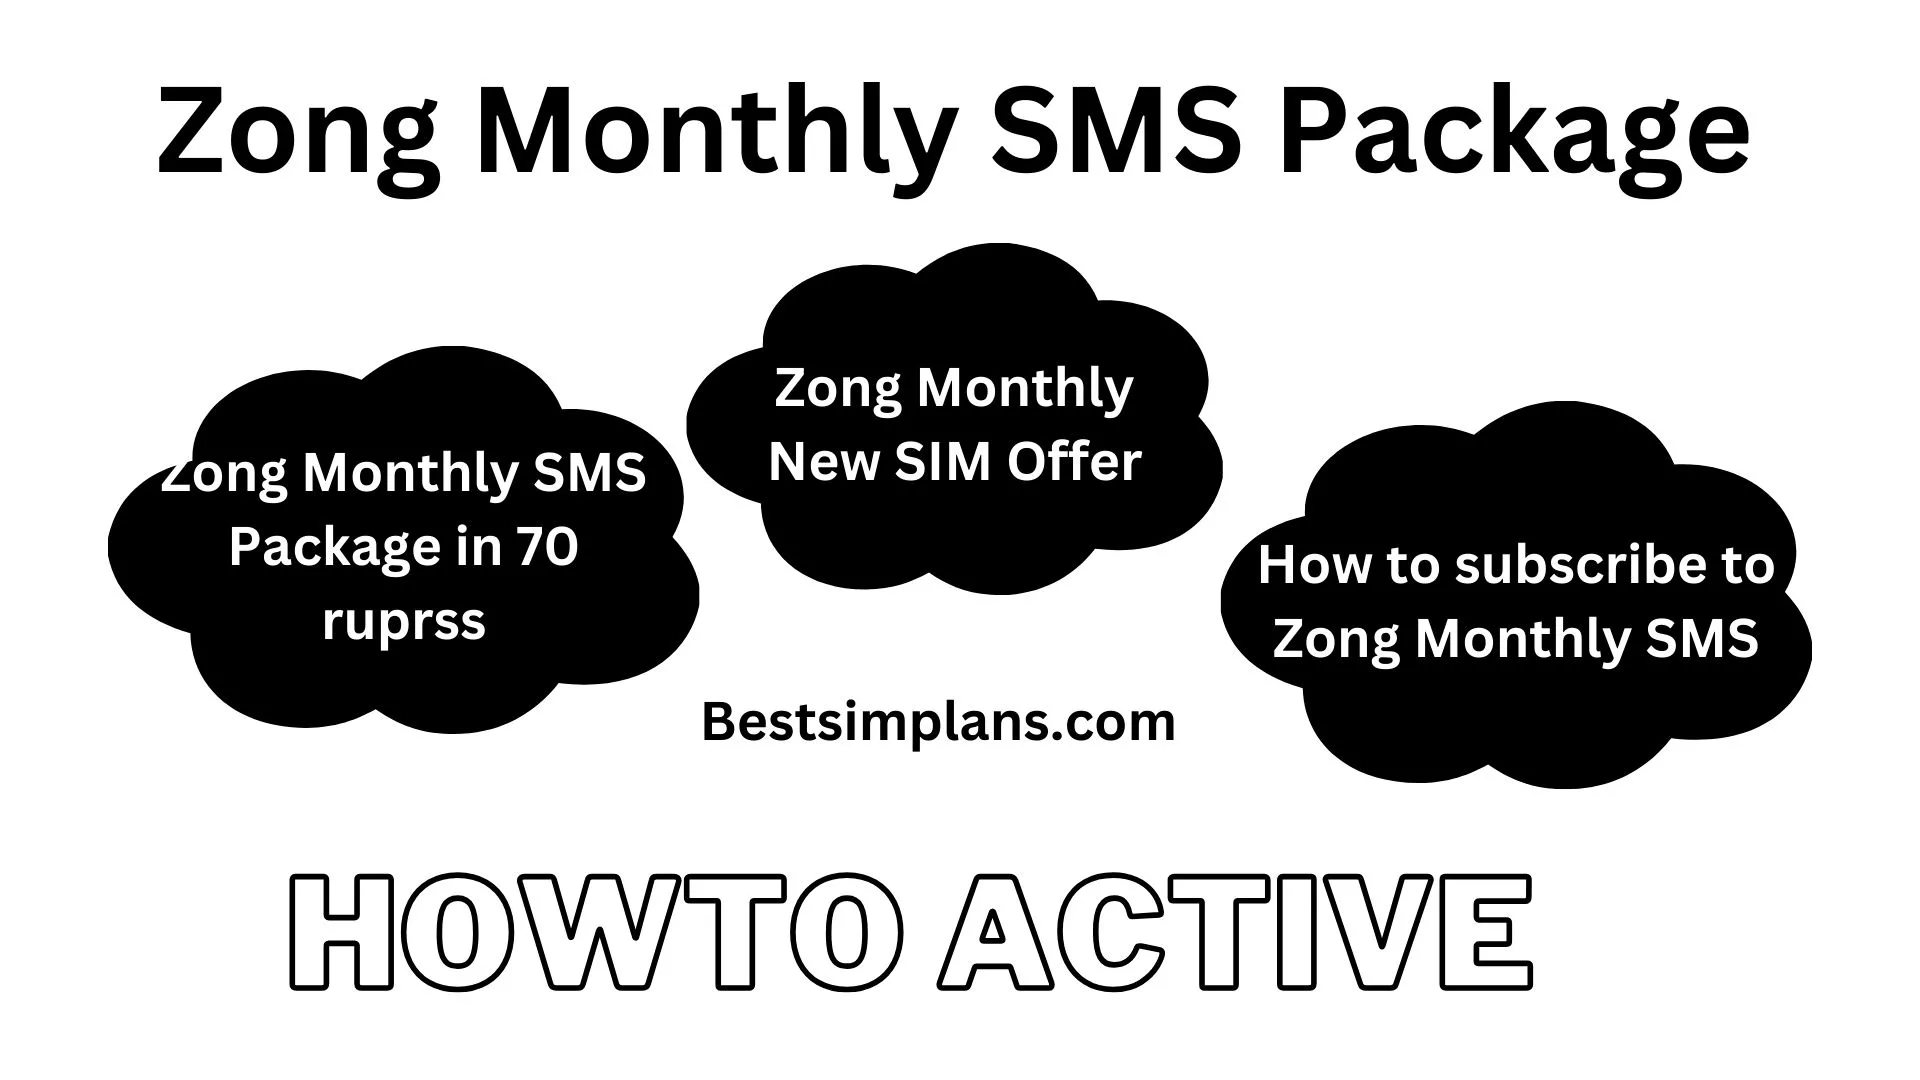 Zong Monthly SMS Package in 80 Rupees